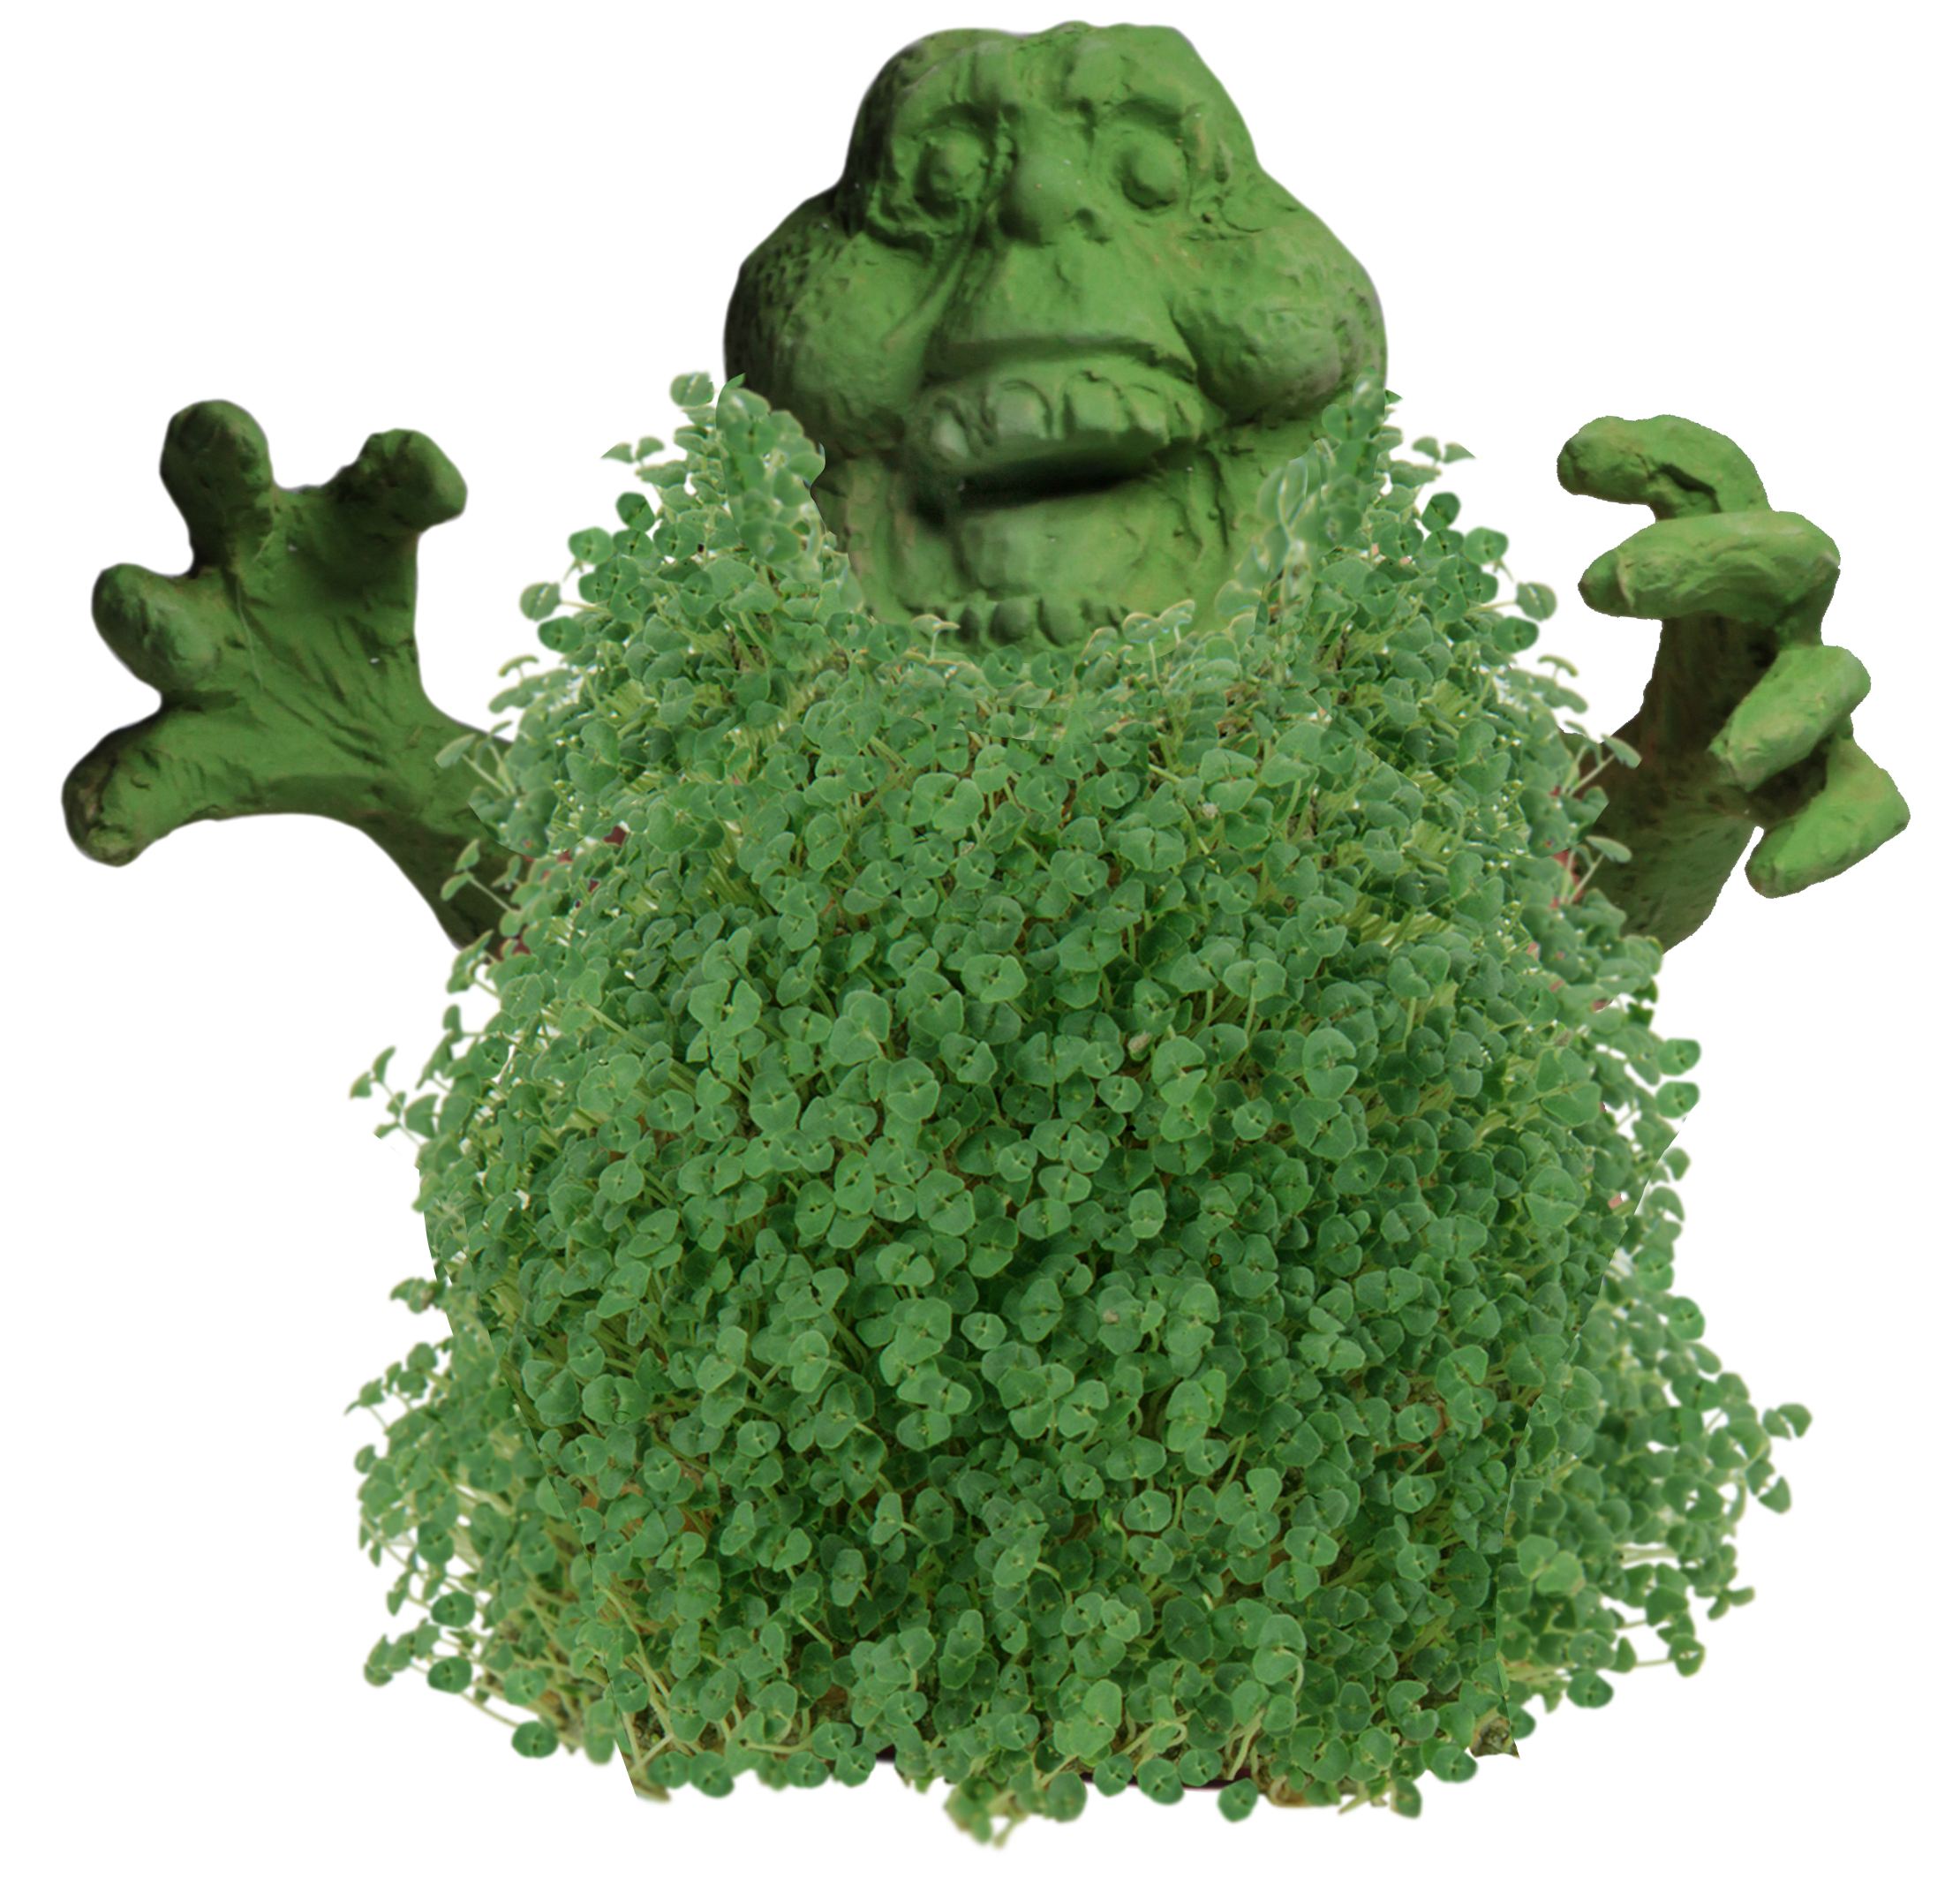 Chia Pet Slimer (Ghostbusters) - Decorative Pot Easy to Do Fun to Grow Chia Seeds - image 3 of 4